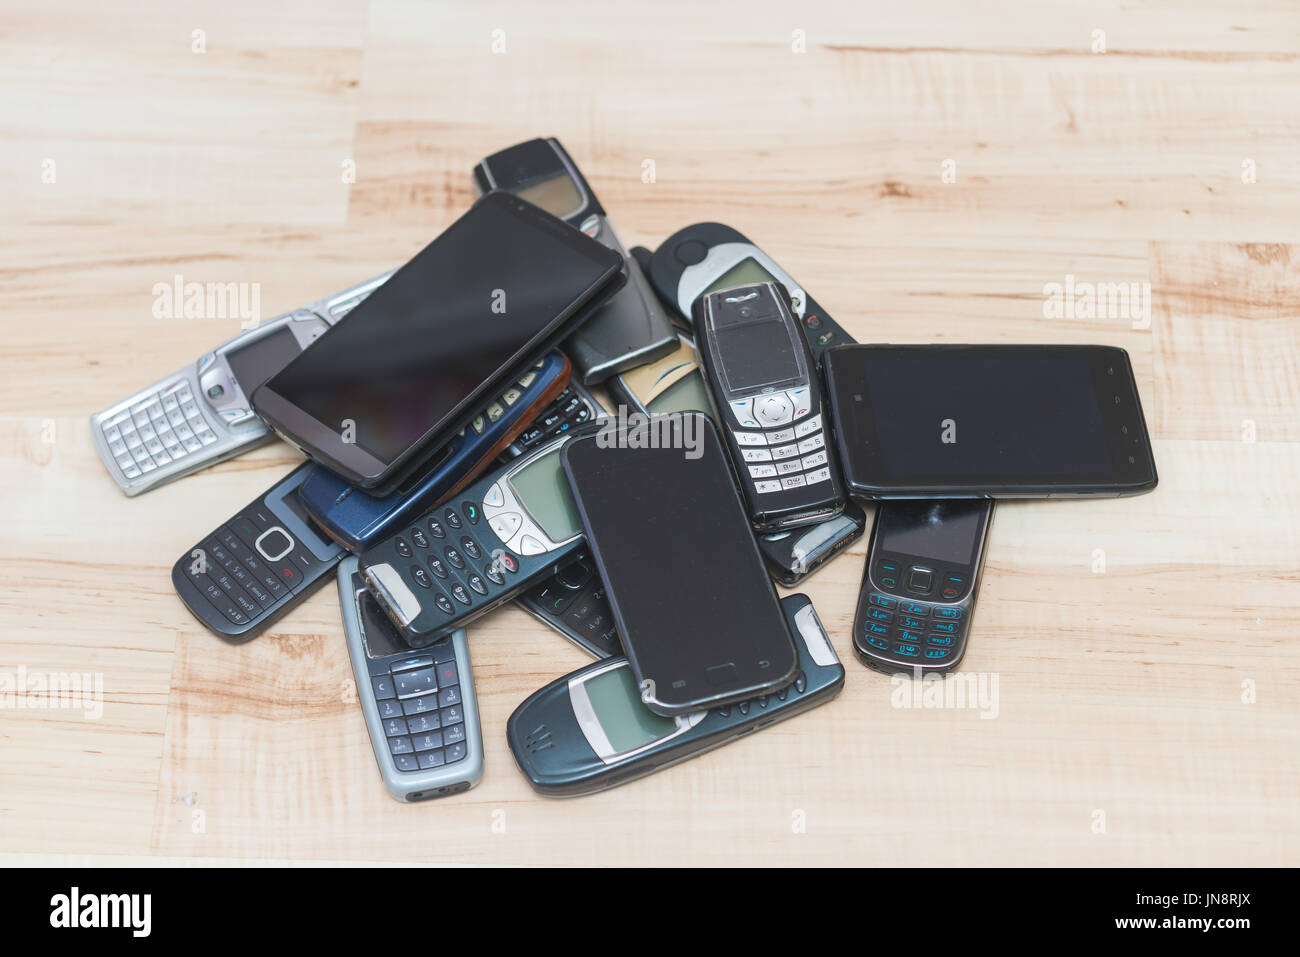 Pile of mobile phones. Old and new models Stock Photo